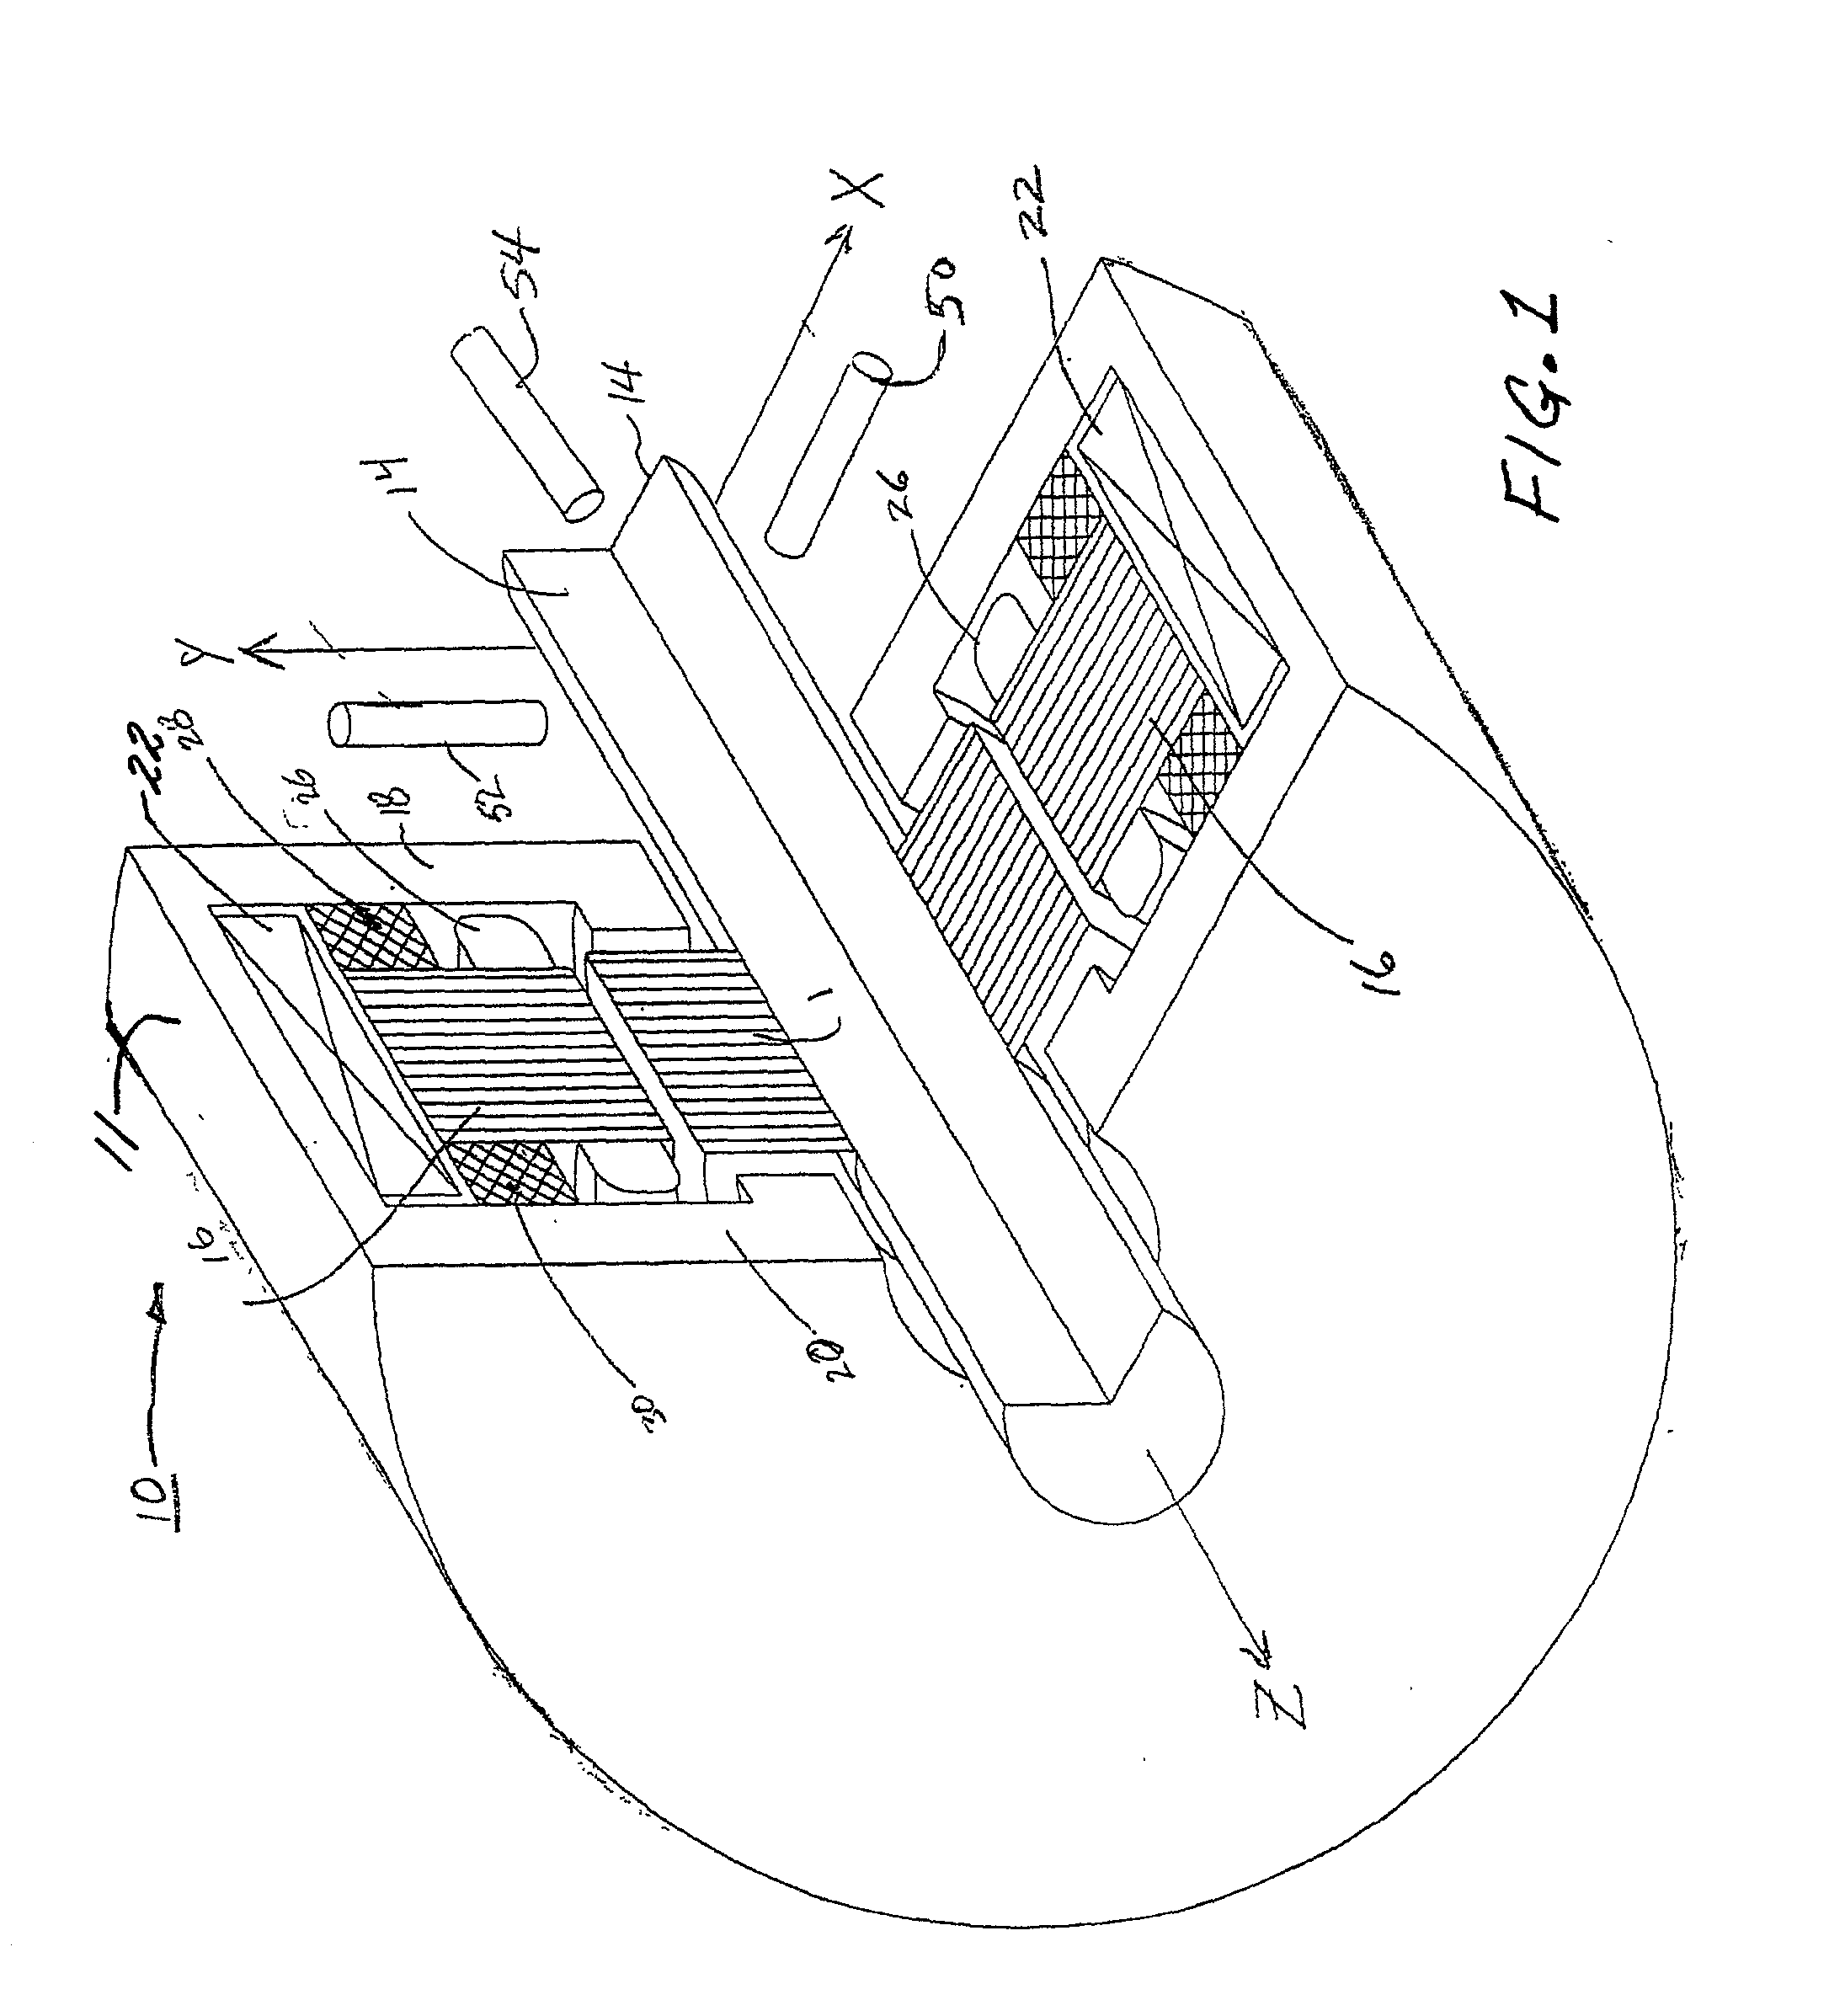 Method and apparatus for providing three axis magnetic bearing having permanent magnets mounted on radial pole stack